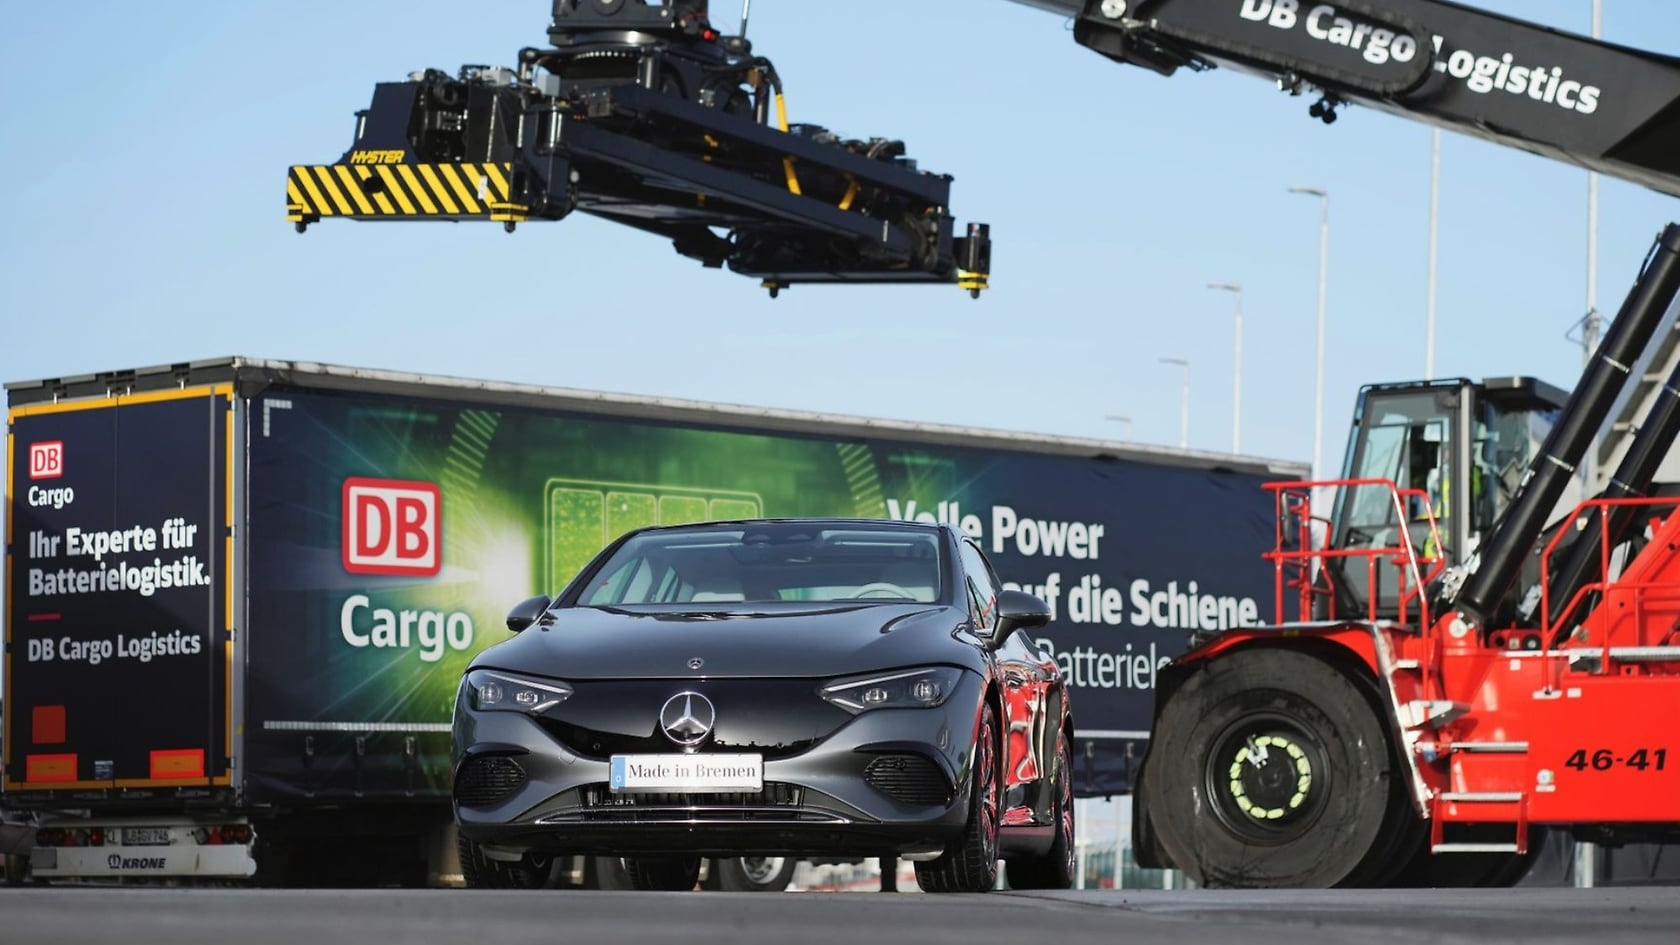 Mercedes-Benz puts batteries on a green track with DB Cargo.